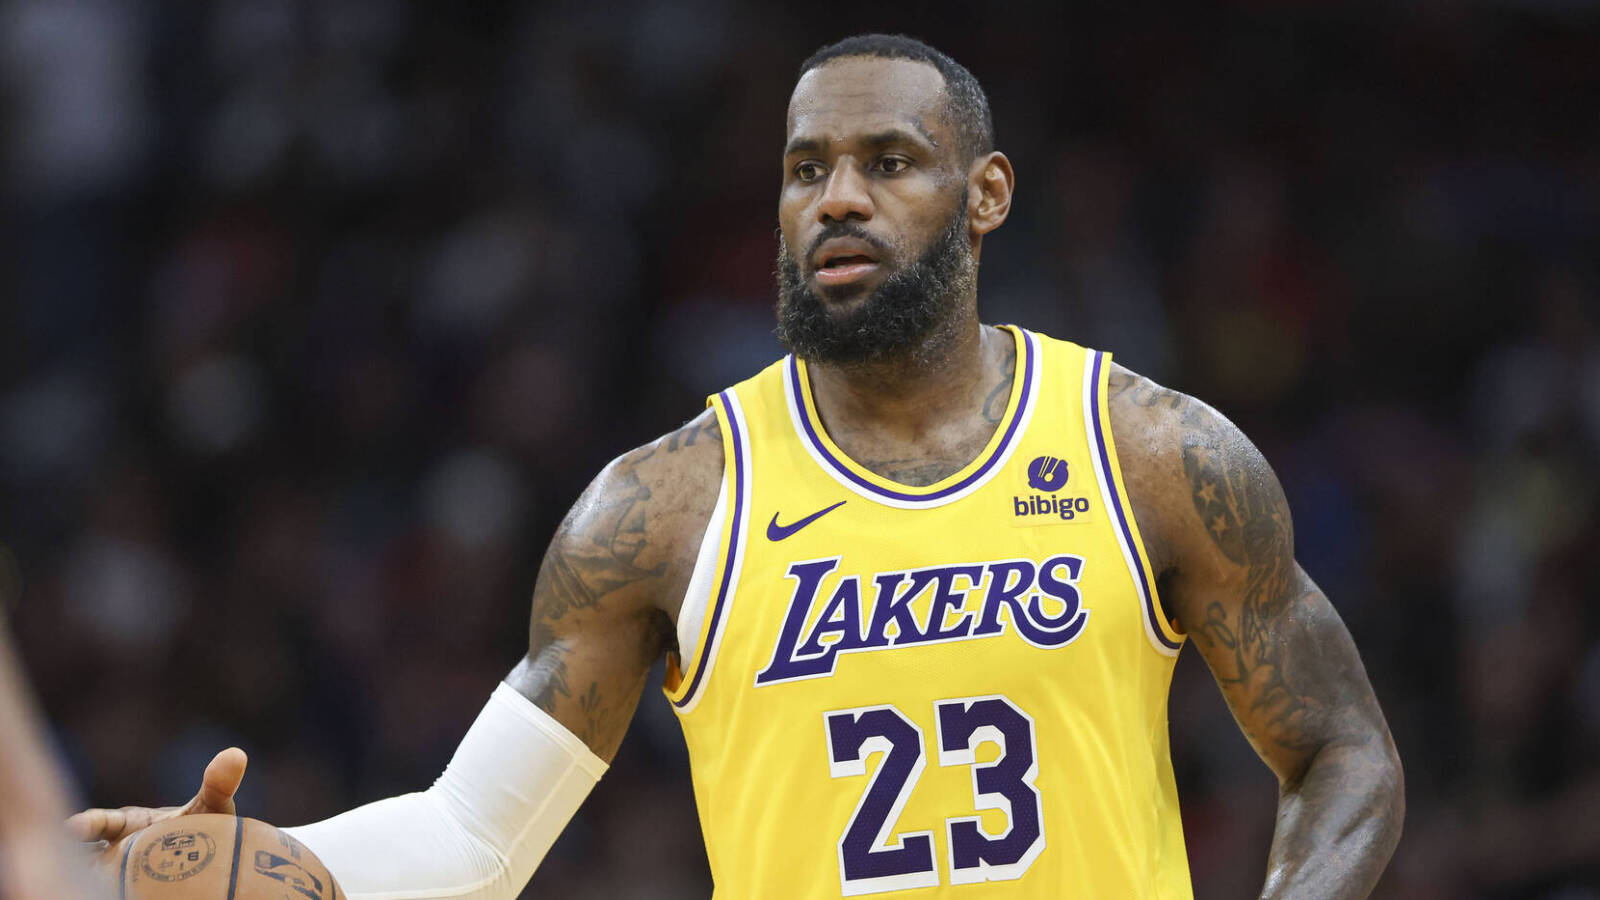 LeBron James still excels on offense, but his defense is a 'nightmare'